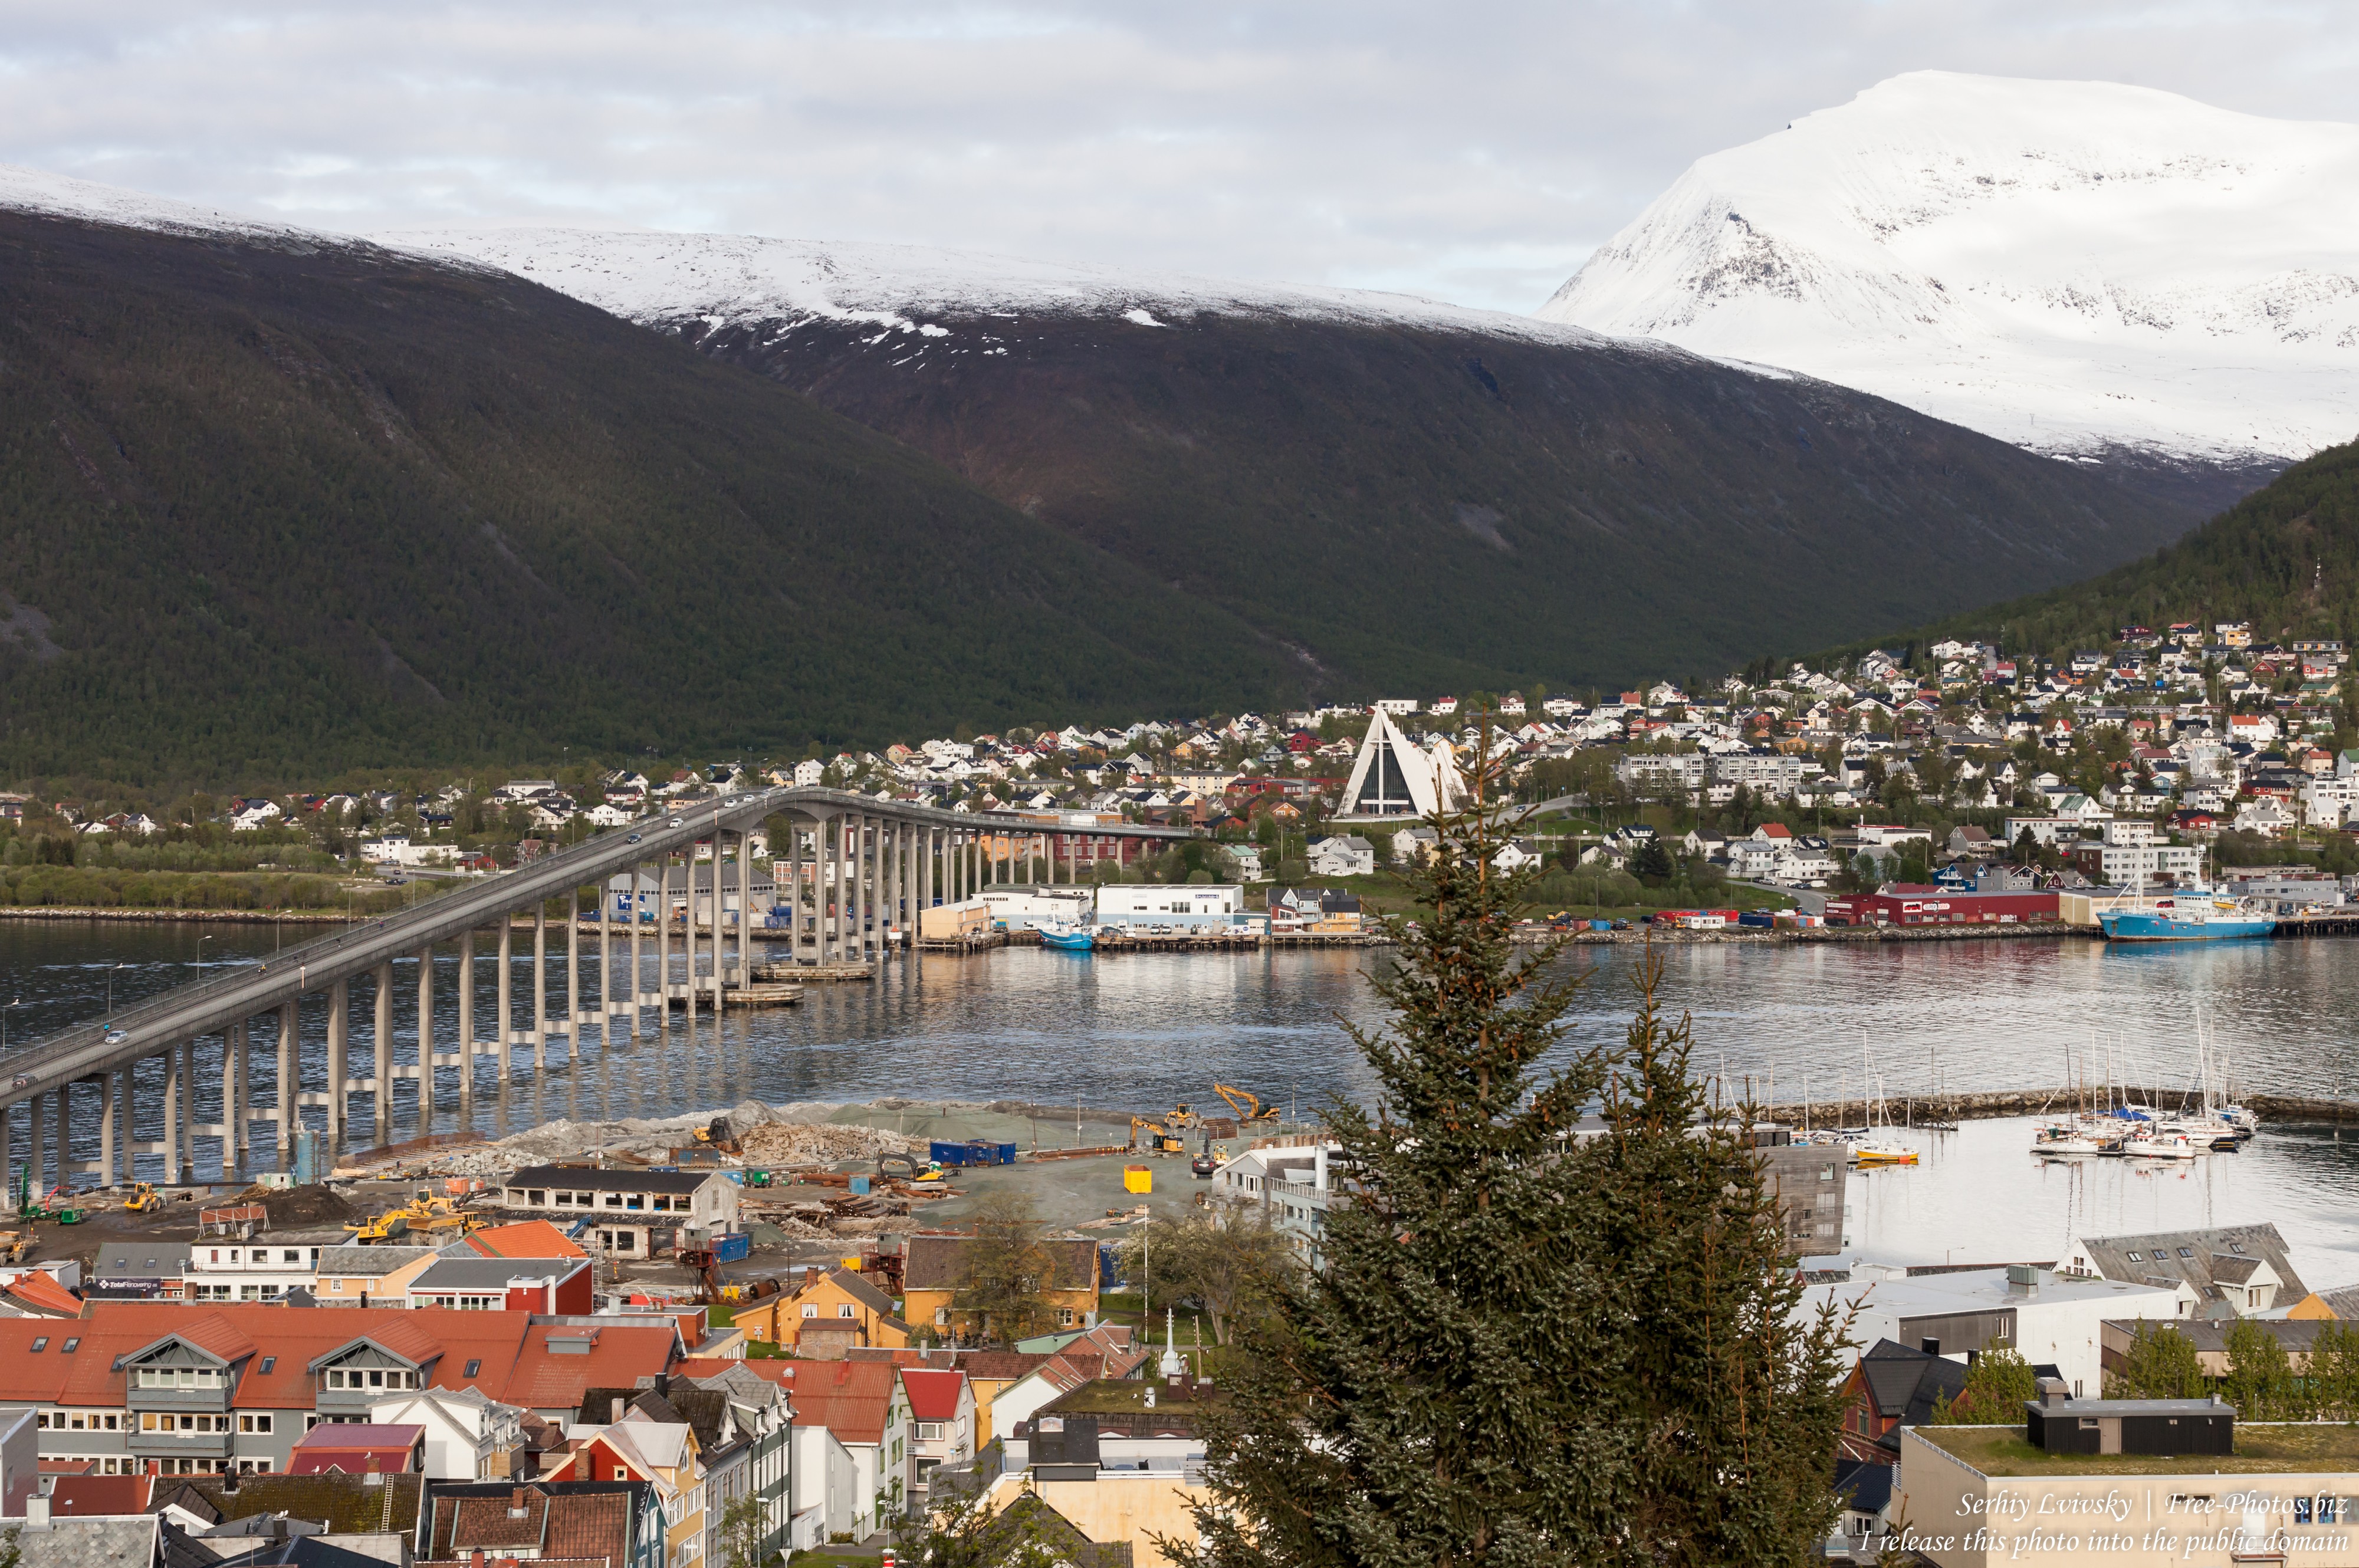 Tromso, Norway, photographed in June 2018 by Serhiy Lvivsky, picture 66